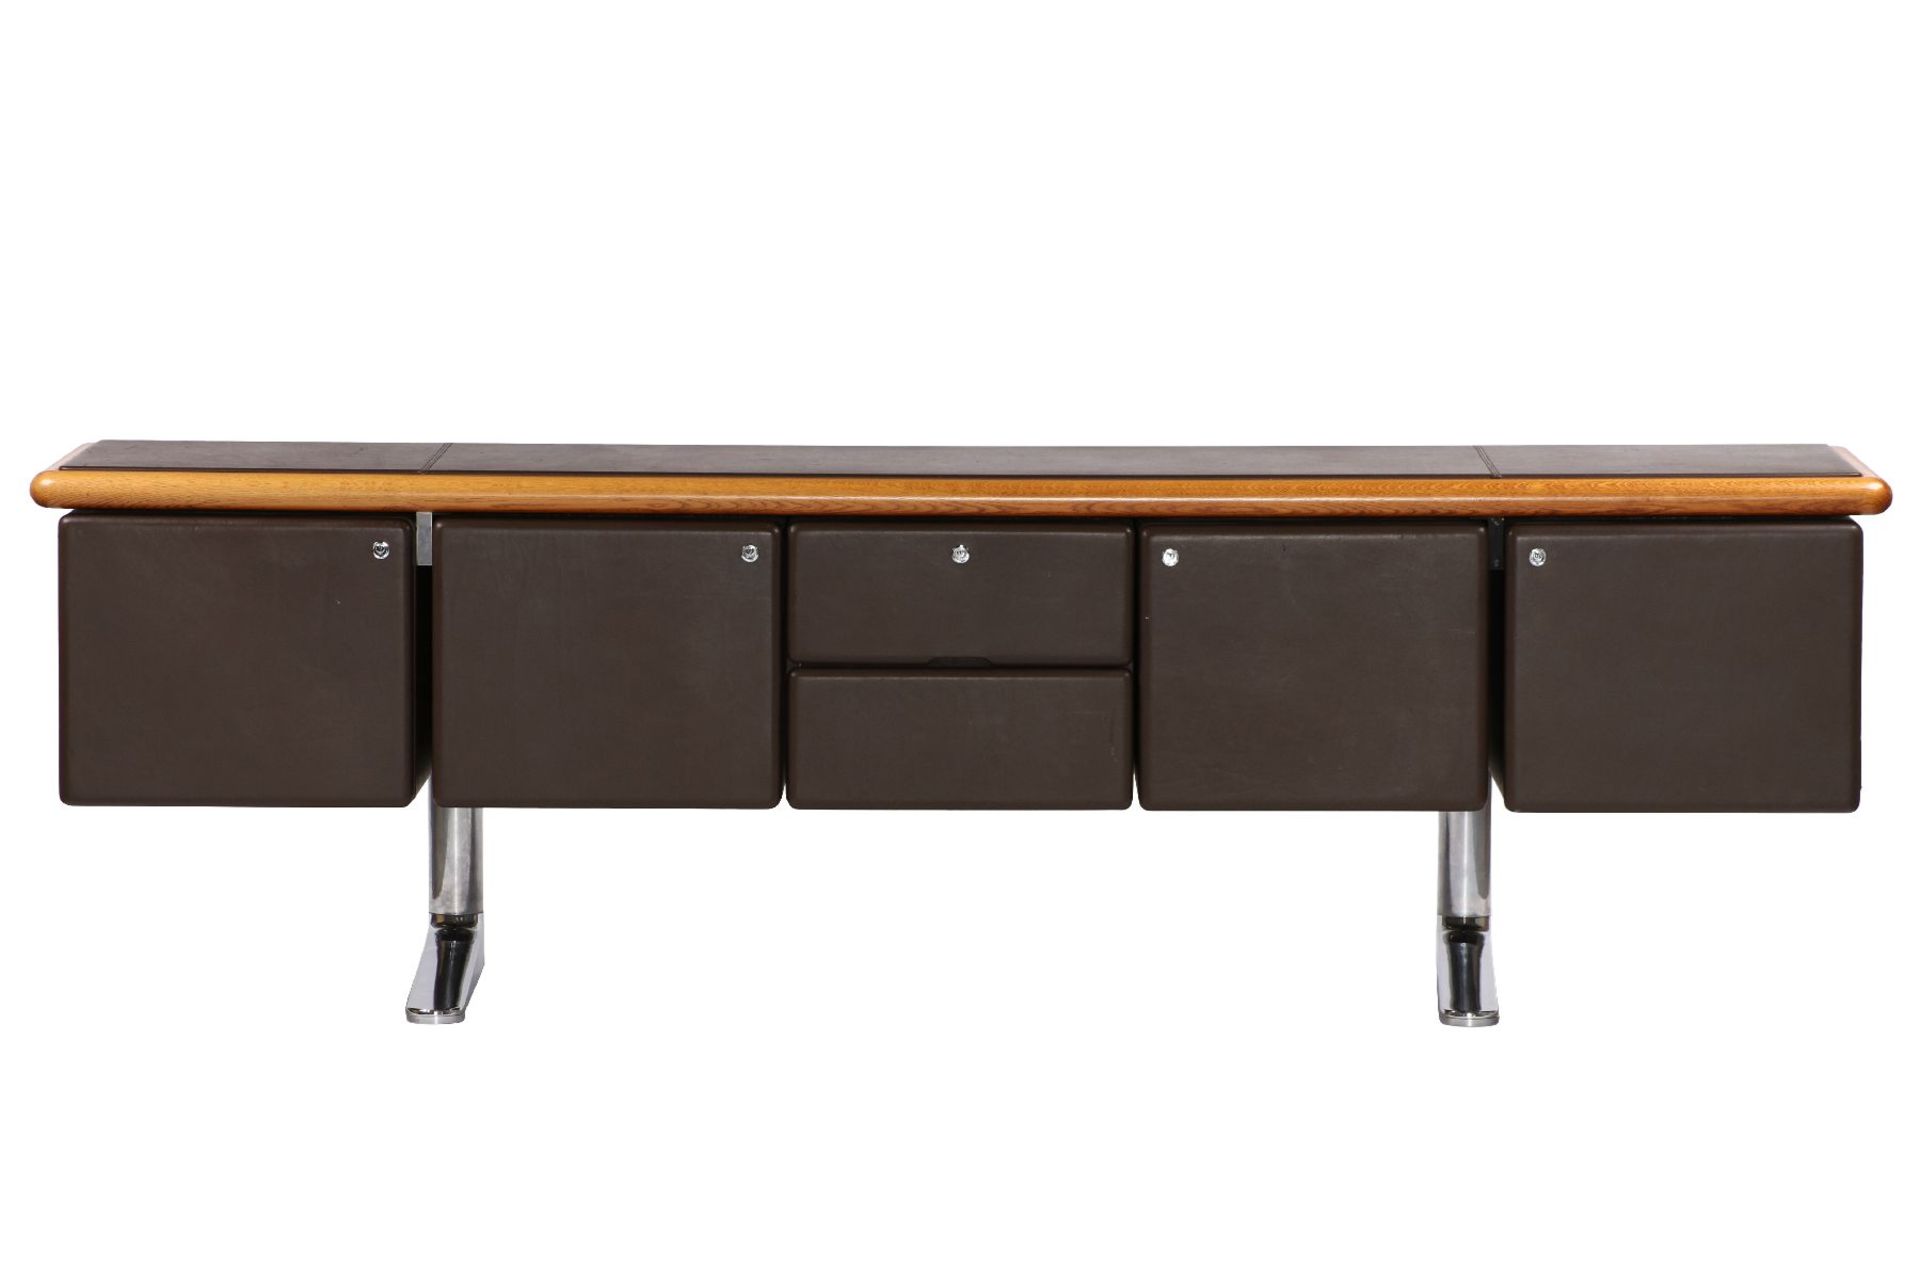 Sideboard, "Knoll international", design draftby Warren Platner from 1973, cover plate all round